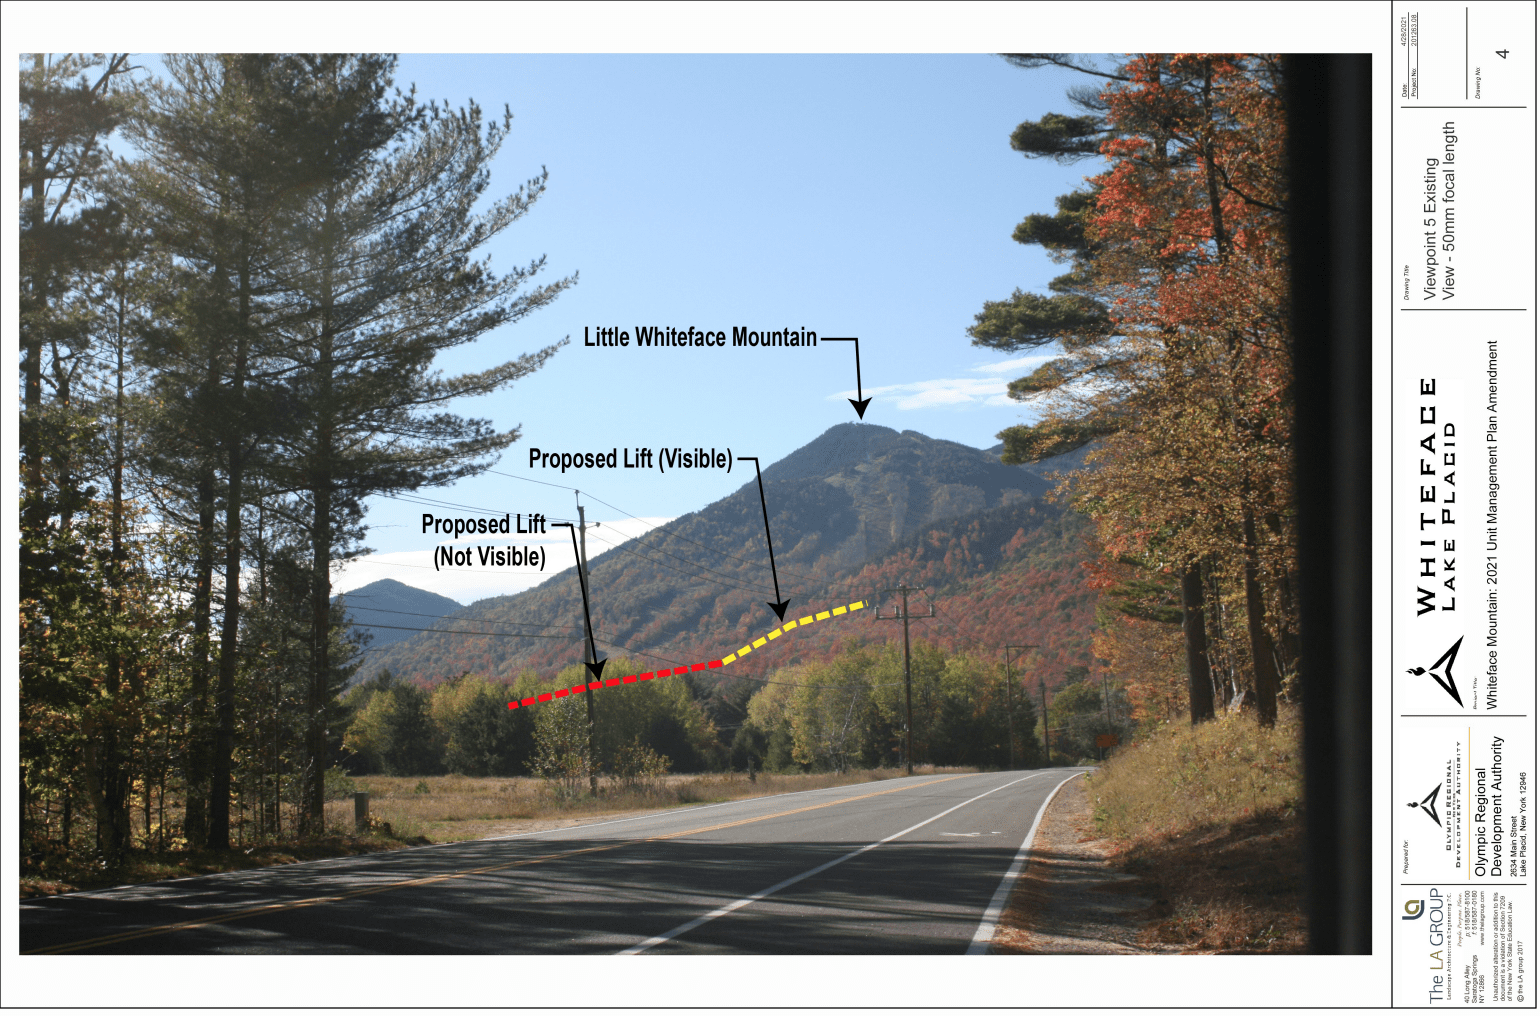 ORDA highlights support for Whiteface trail expansion plan